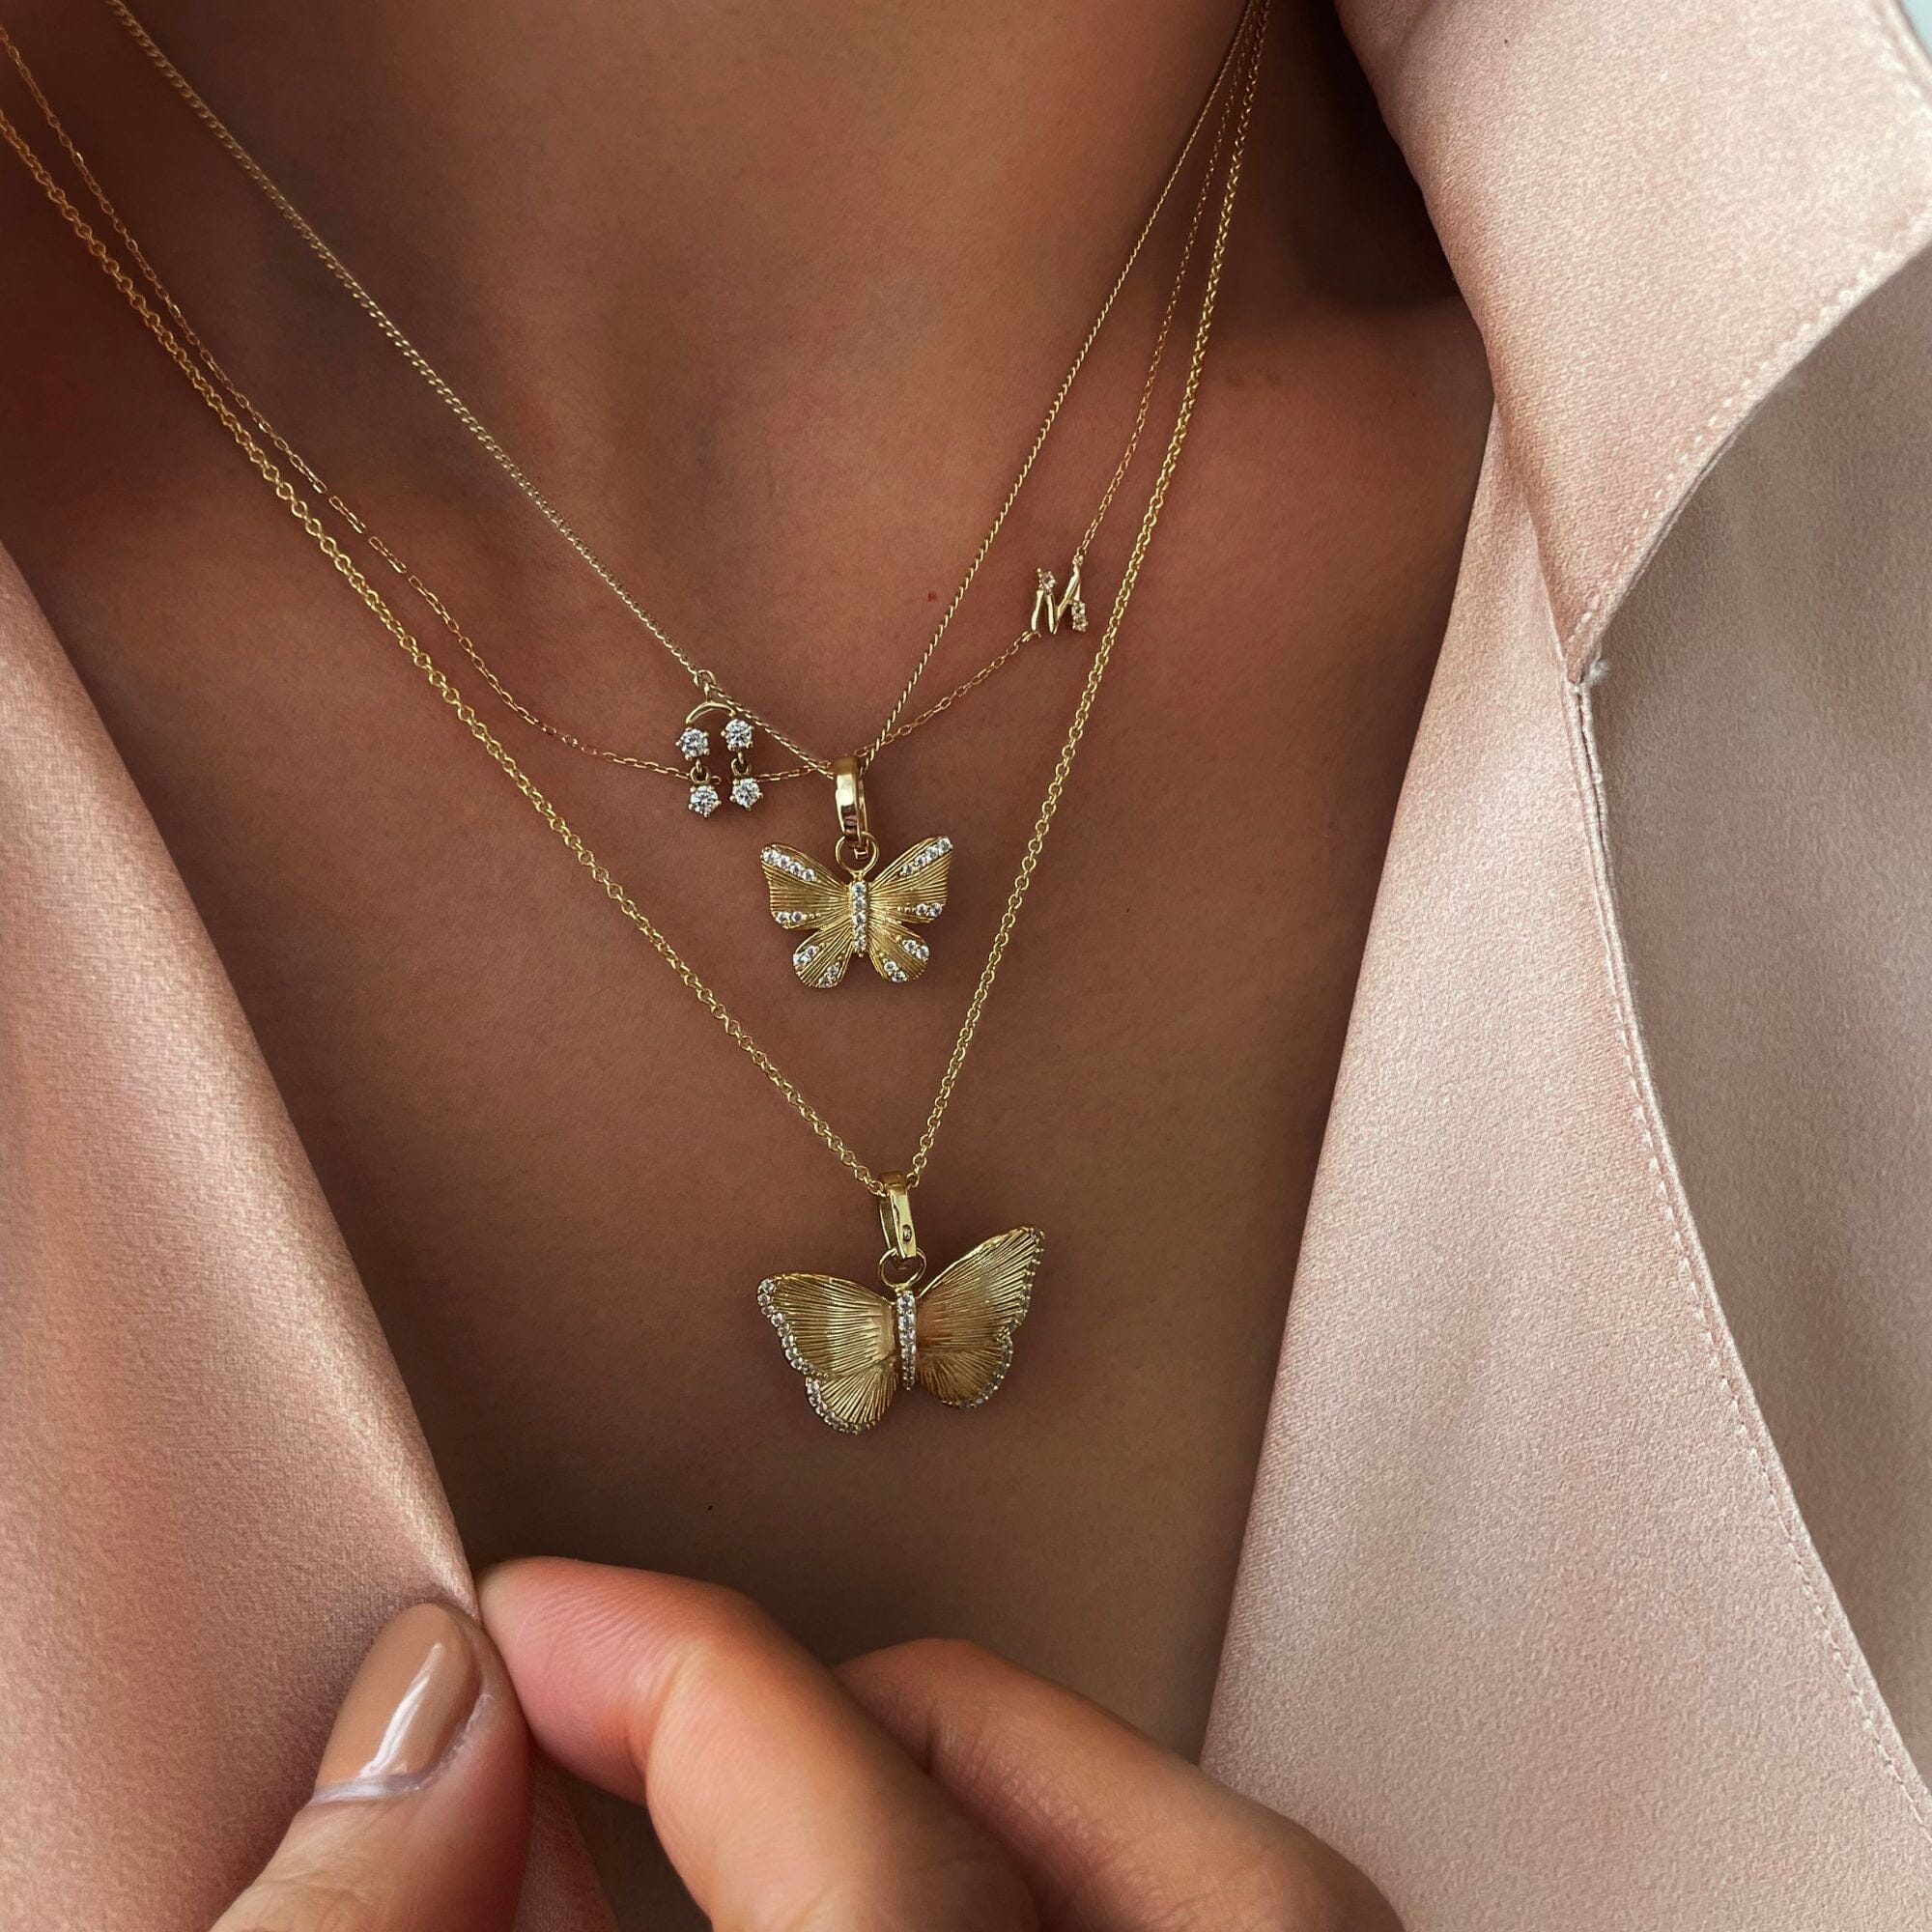 Gold Plated Butterfly Charm Butterfly Chain Pendant For Women Trendy Double  Chain Statement Bib Jewelry Gift From Wishlove7878, $0.81 | DHgate.Com